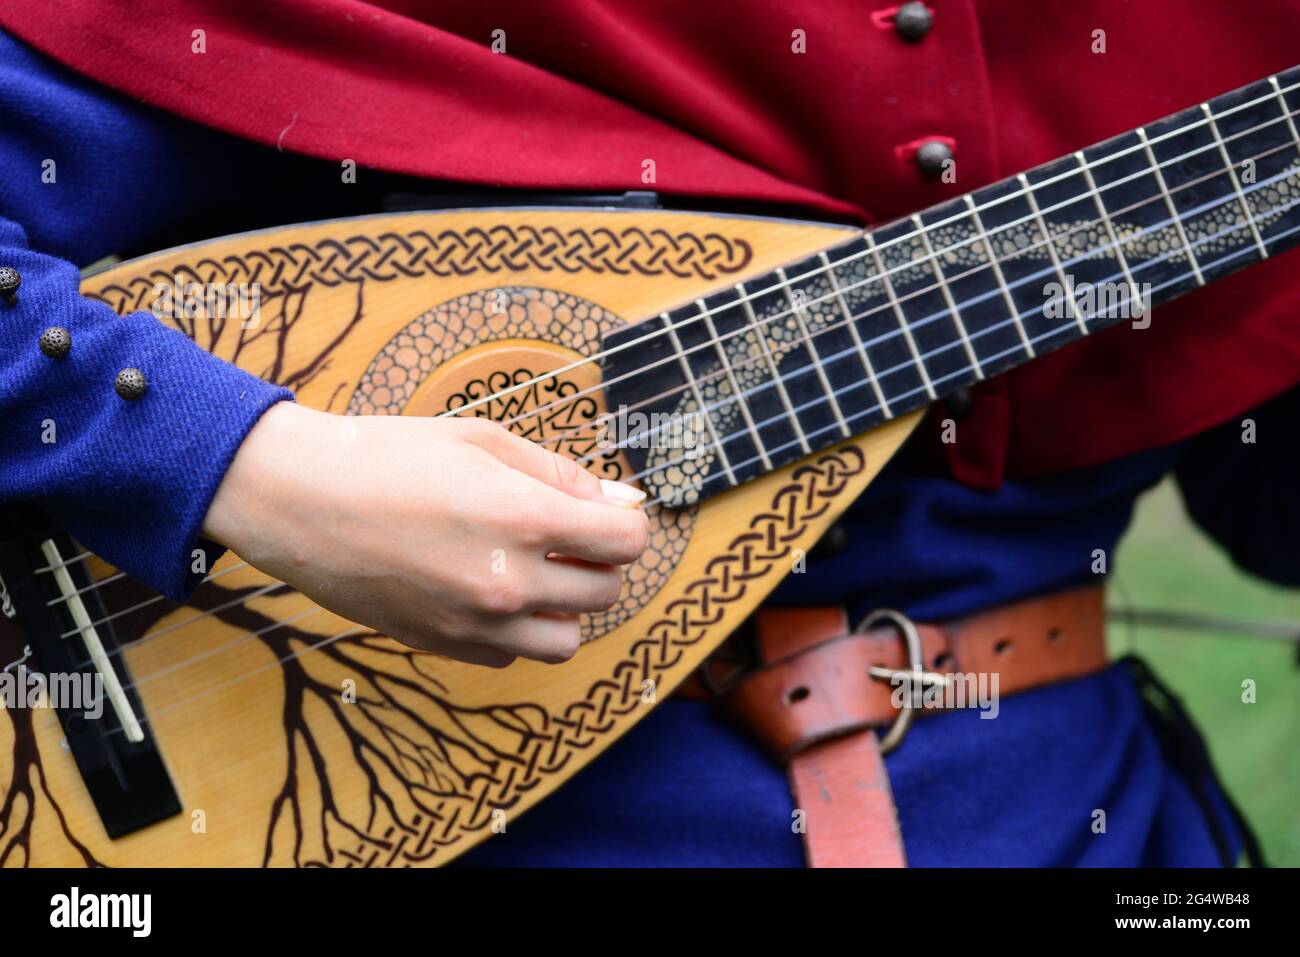 medieval mandolin musical instrument player hand detail Stock Photo